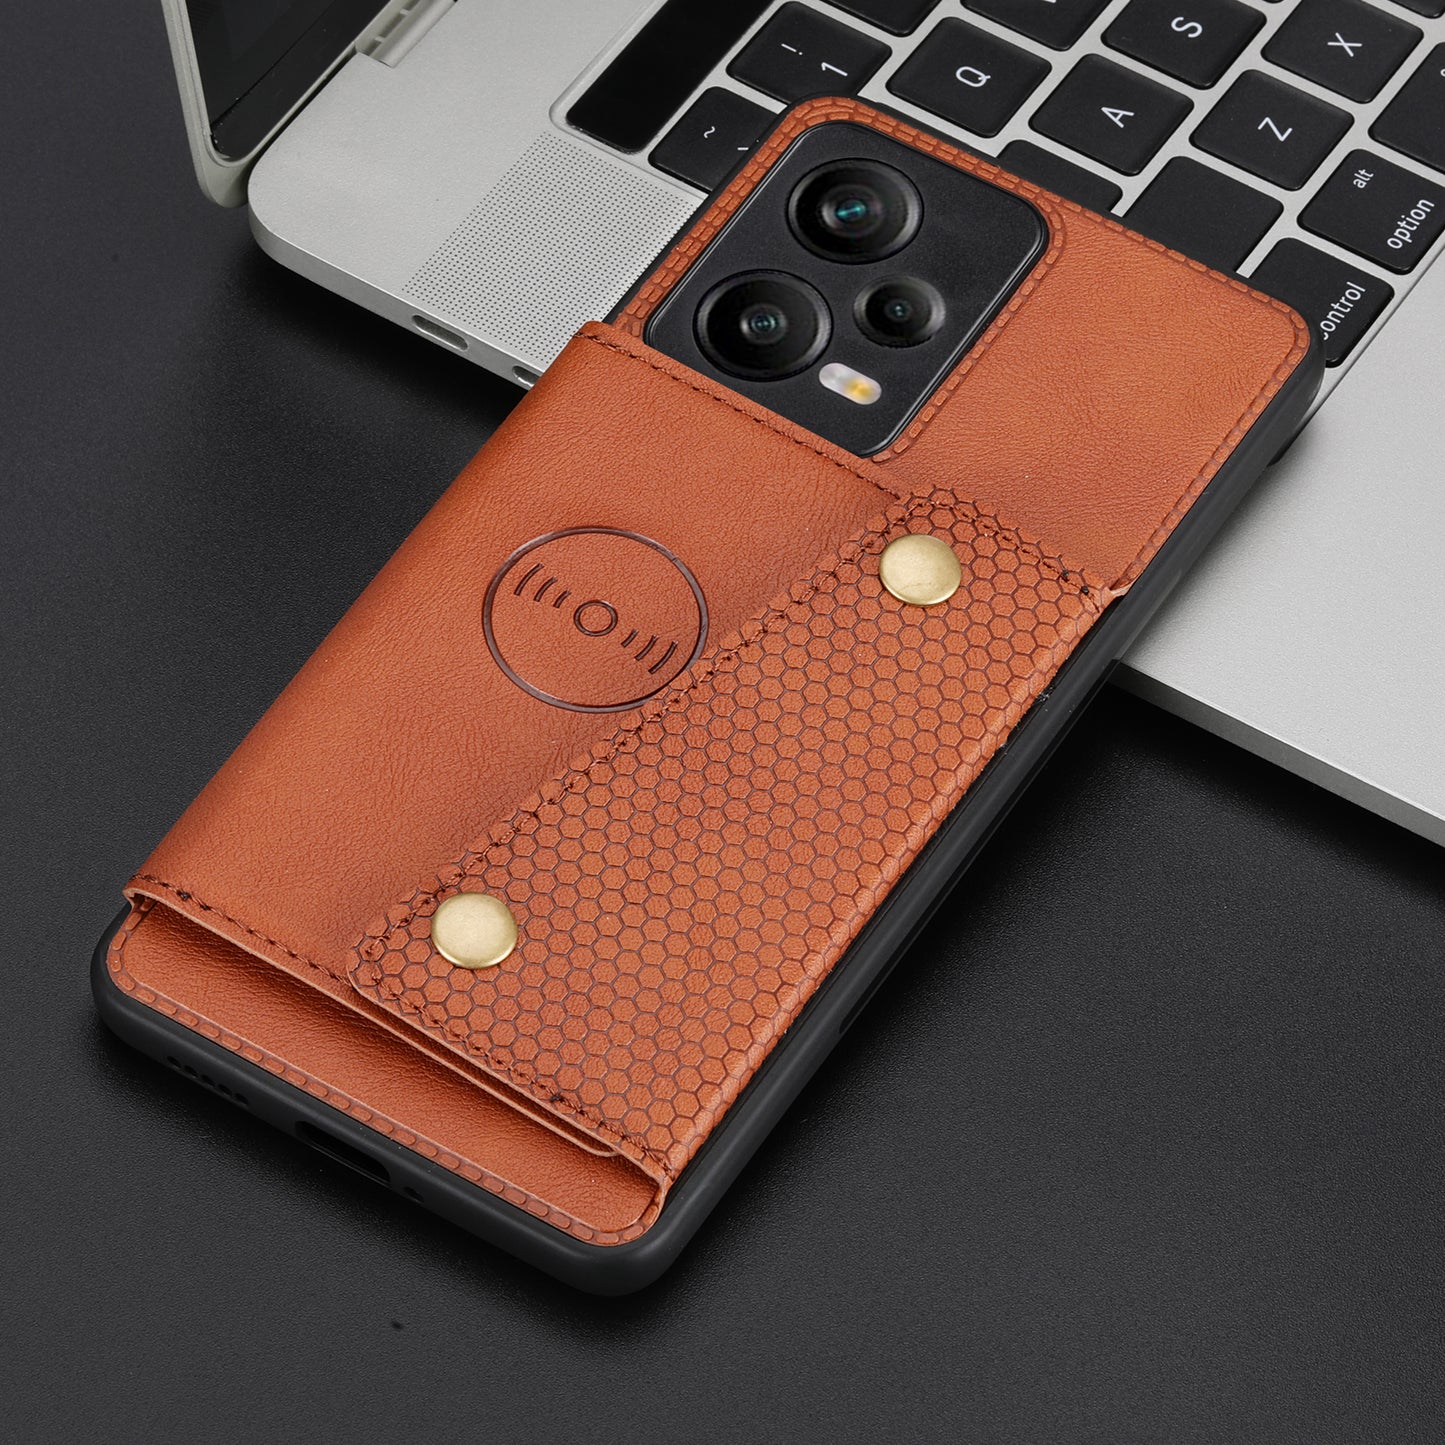 For Xiaomi Redmi Note 12 Pro+ 5G Kickstand Dual Button Card Holder Phone Cover Leather Coated TPU Case with Built-in Metal Sheet